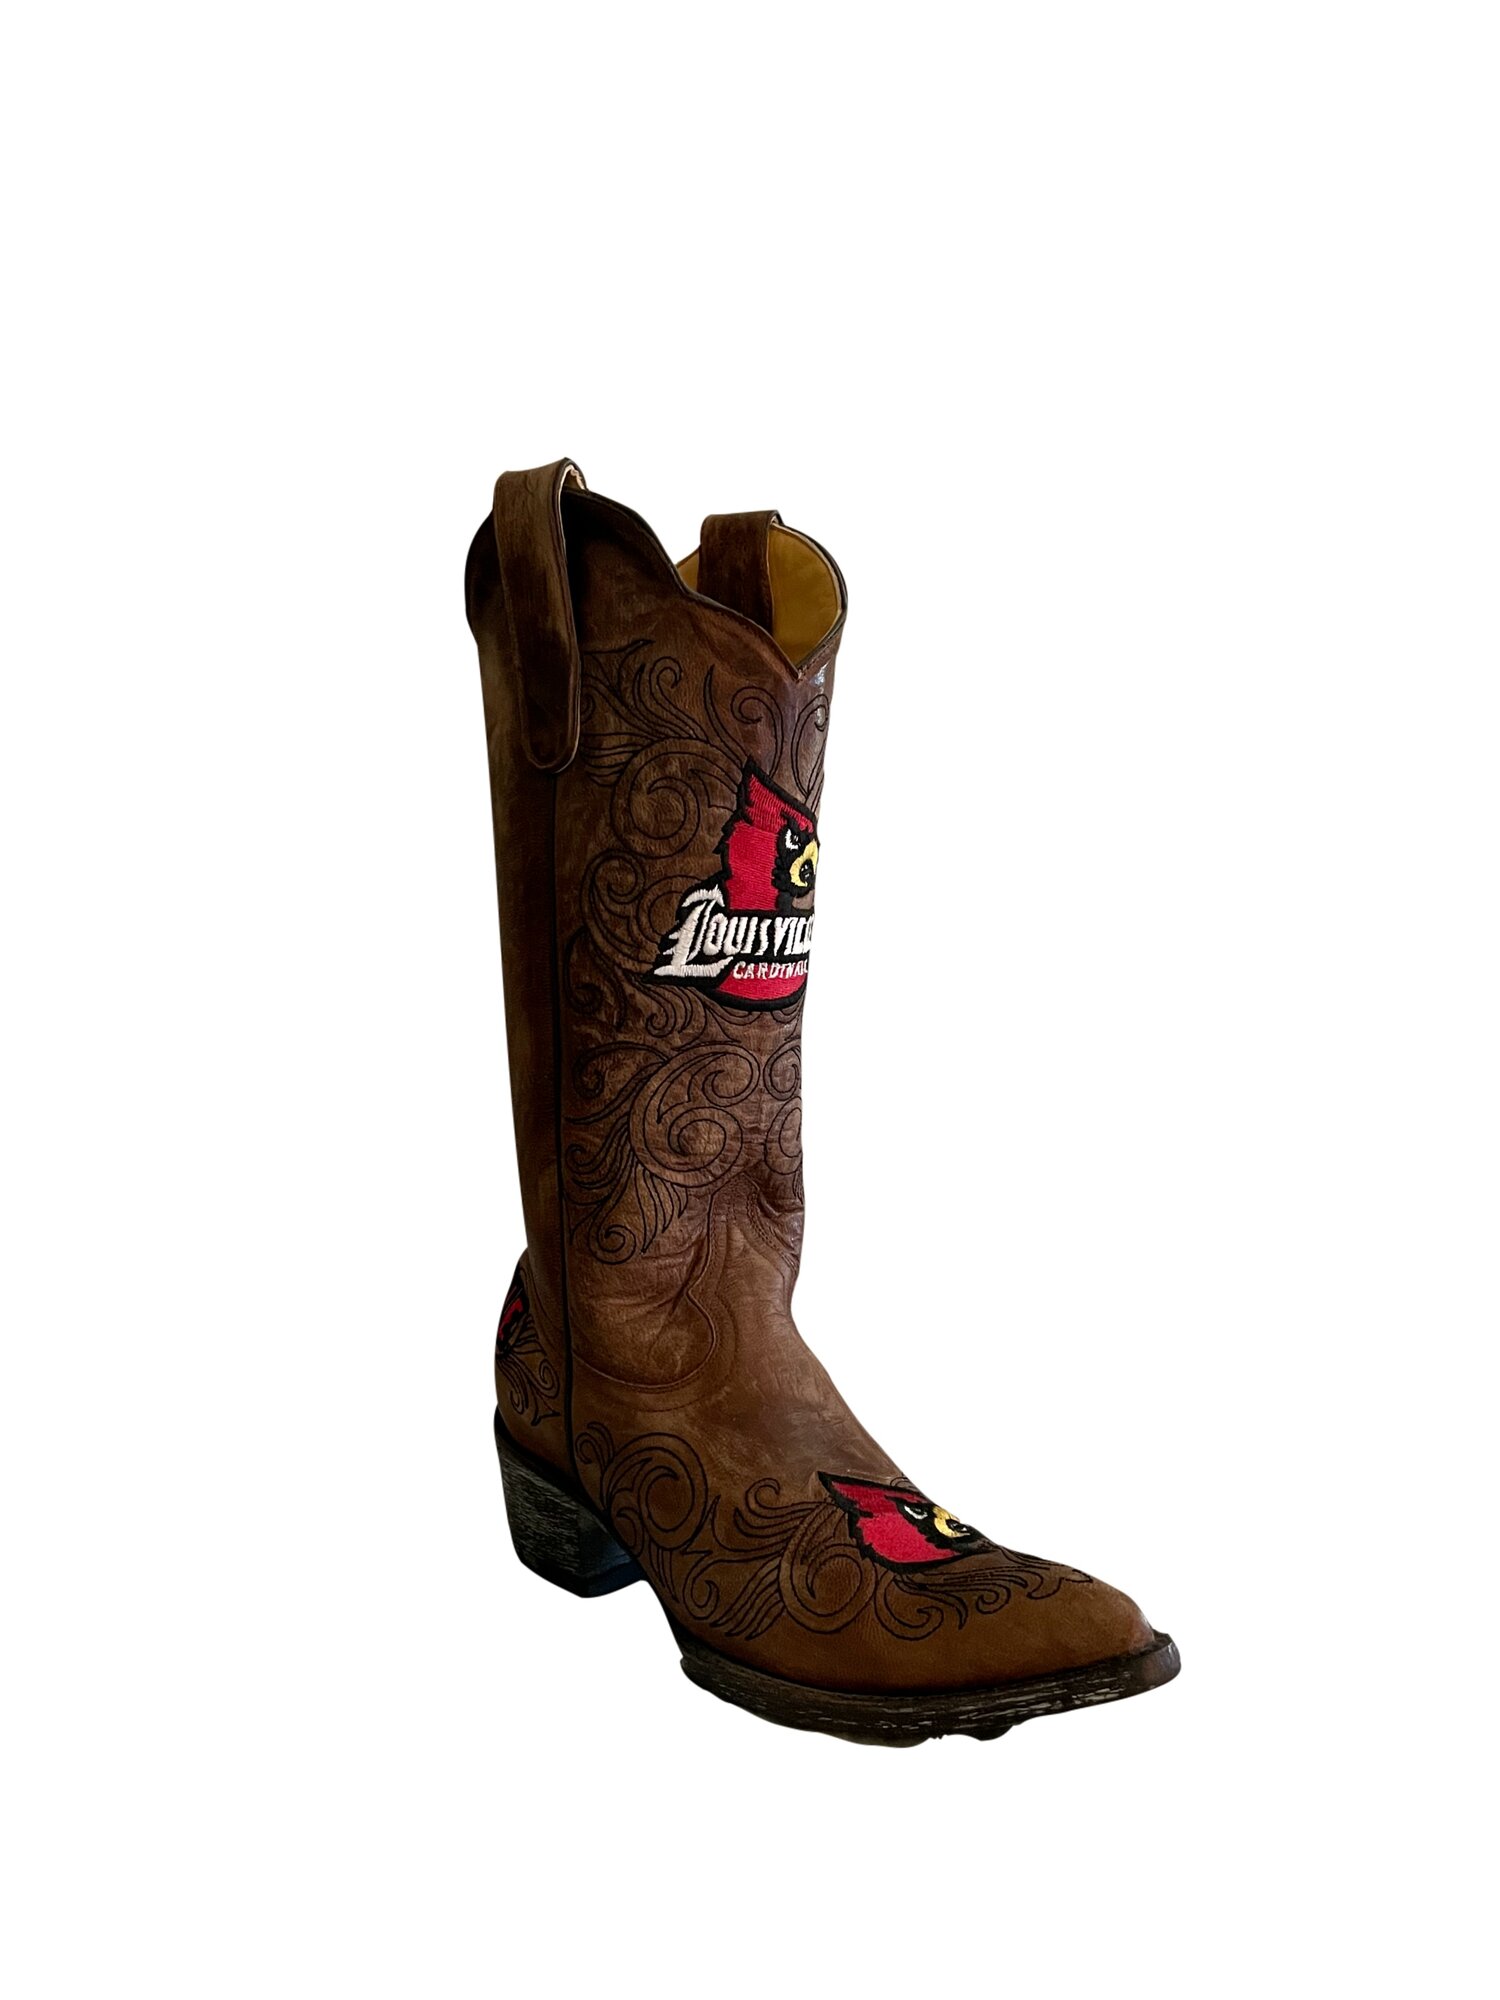  NCAA Louisville Cardinals Men's Board Room Style Boots, Brass,  8.5 D (M) US : Clothing, Shoes & Jewelry